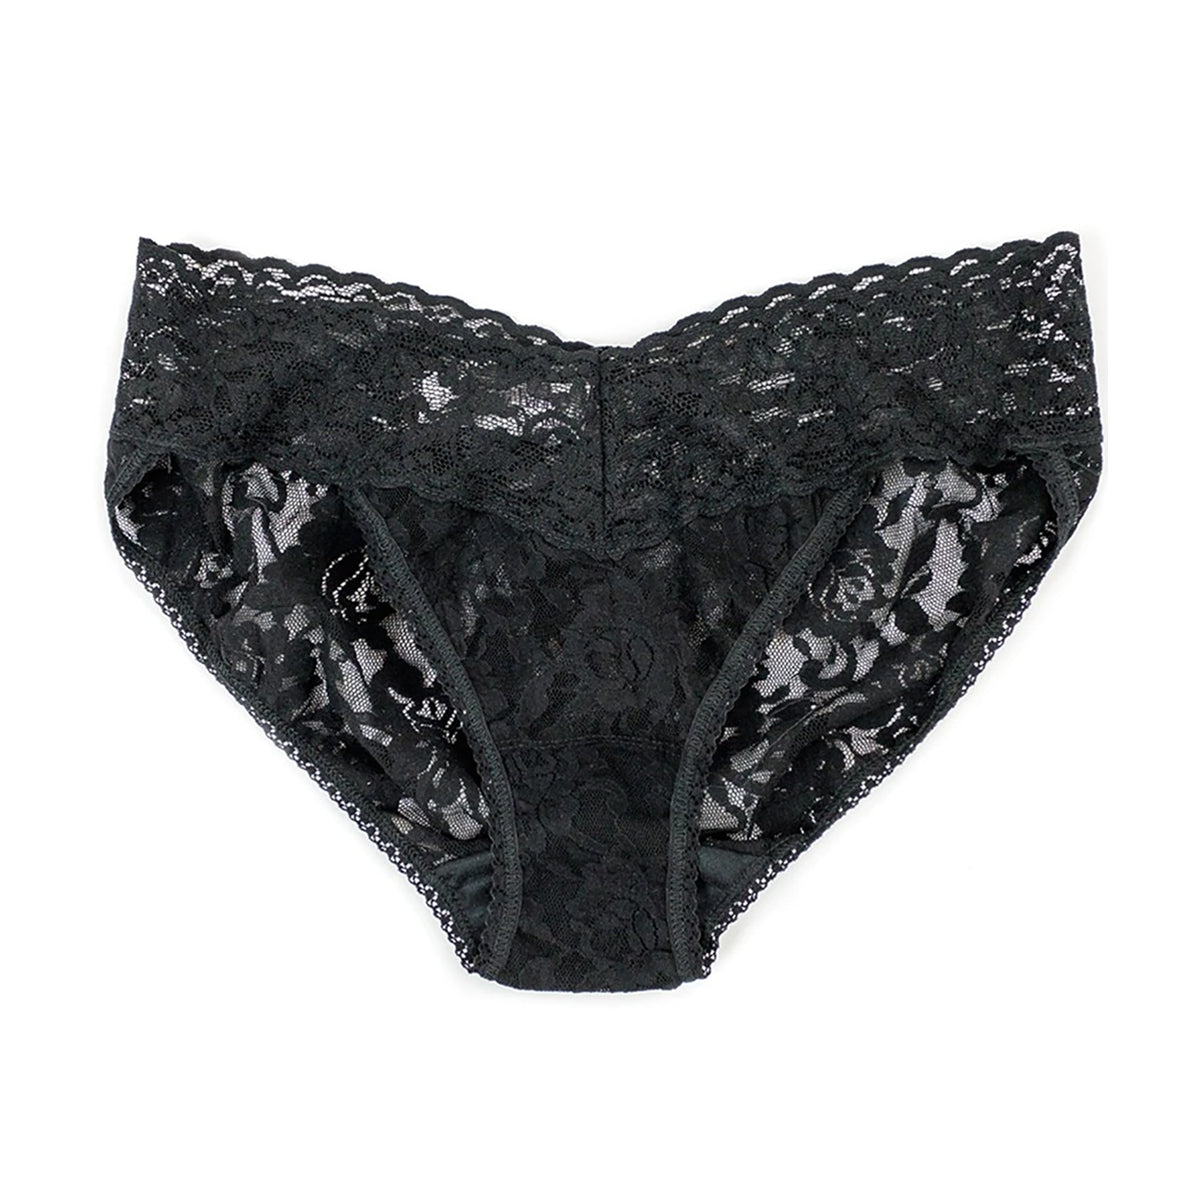 MyRunway  Shop Daily Finery Black Thong Front Lace Bikini Briefs for Women  from